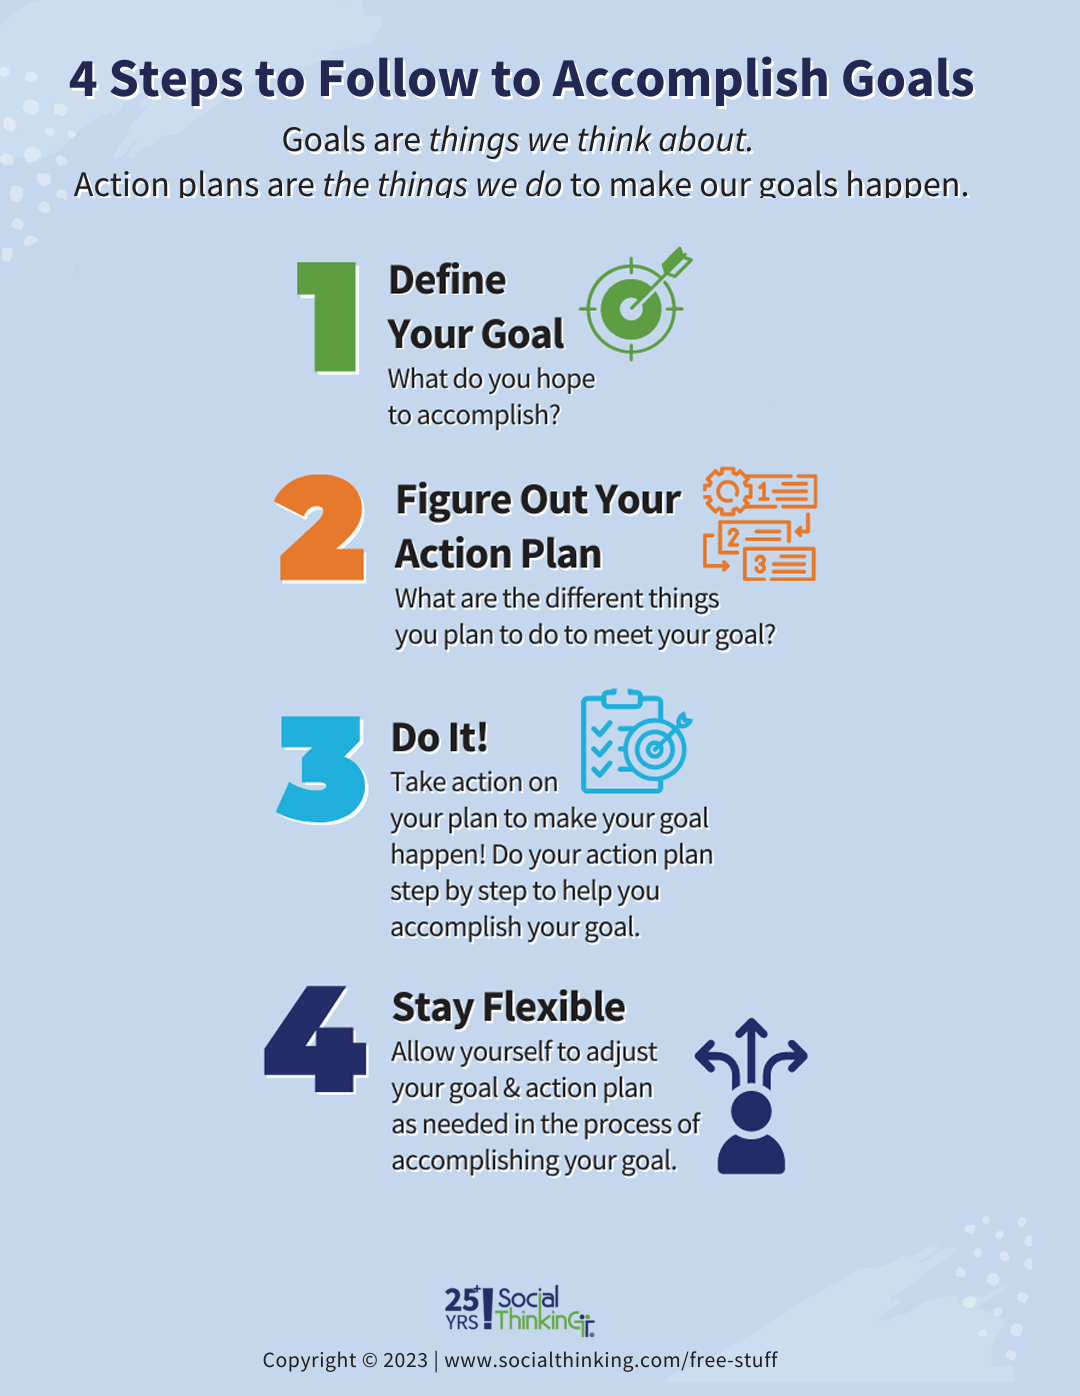 4 Steps to Follow to Accomplish Goals